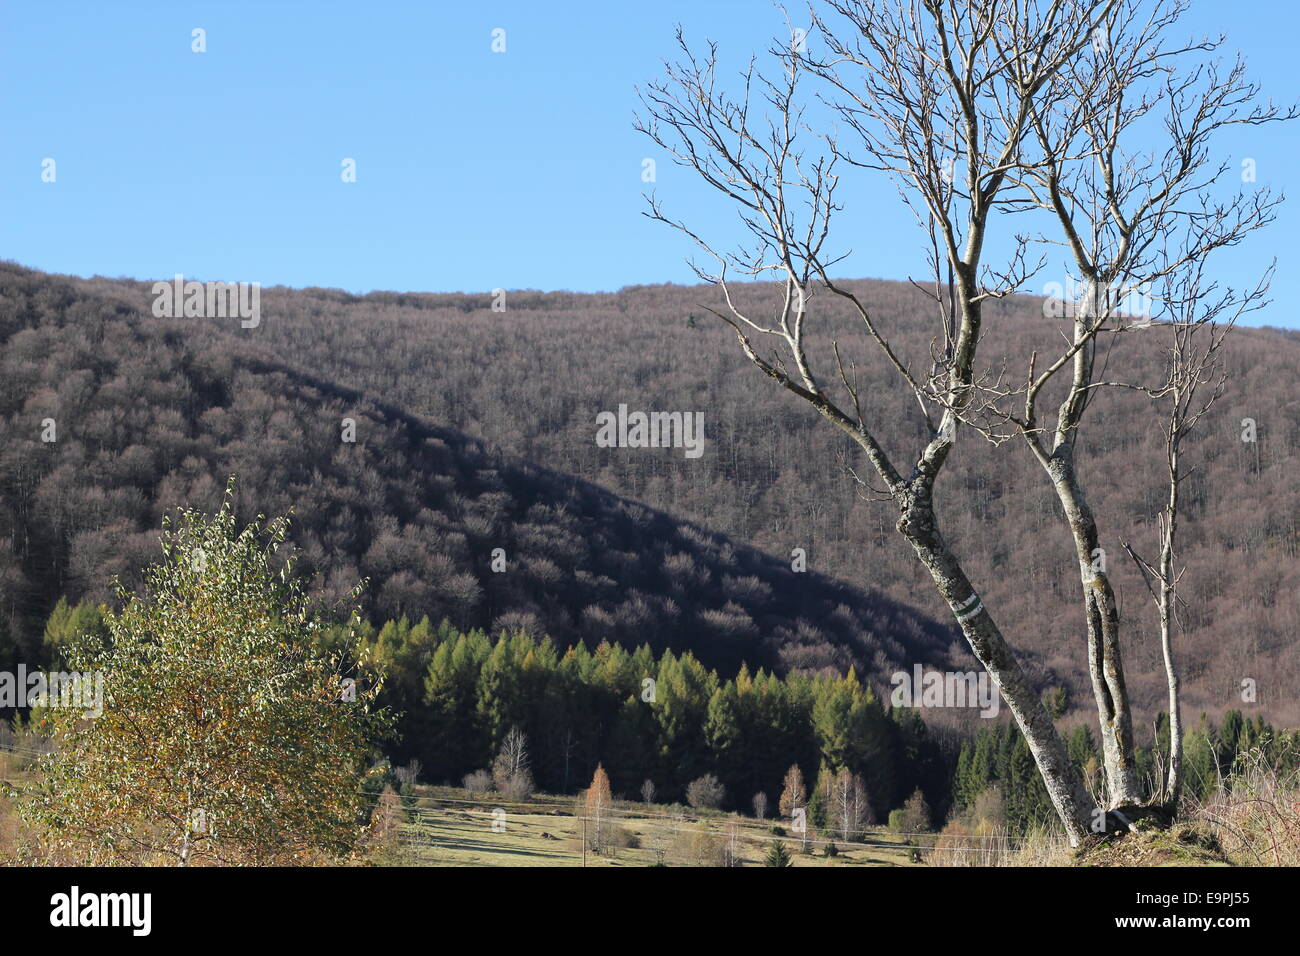 Beautiful sunny day is in mountain landscape Stock Photo